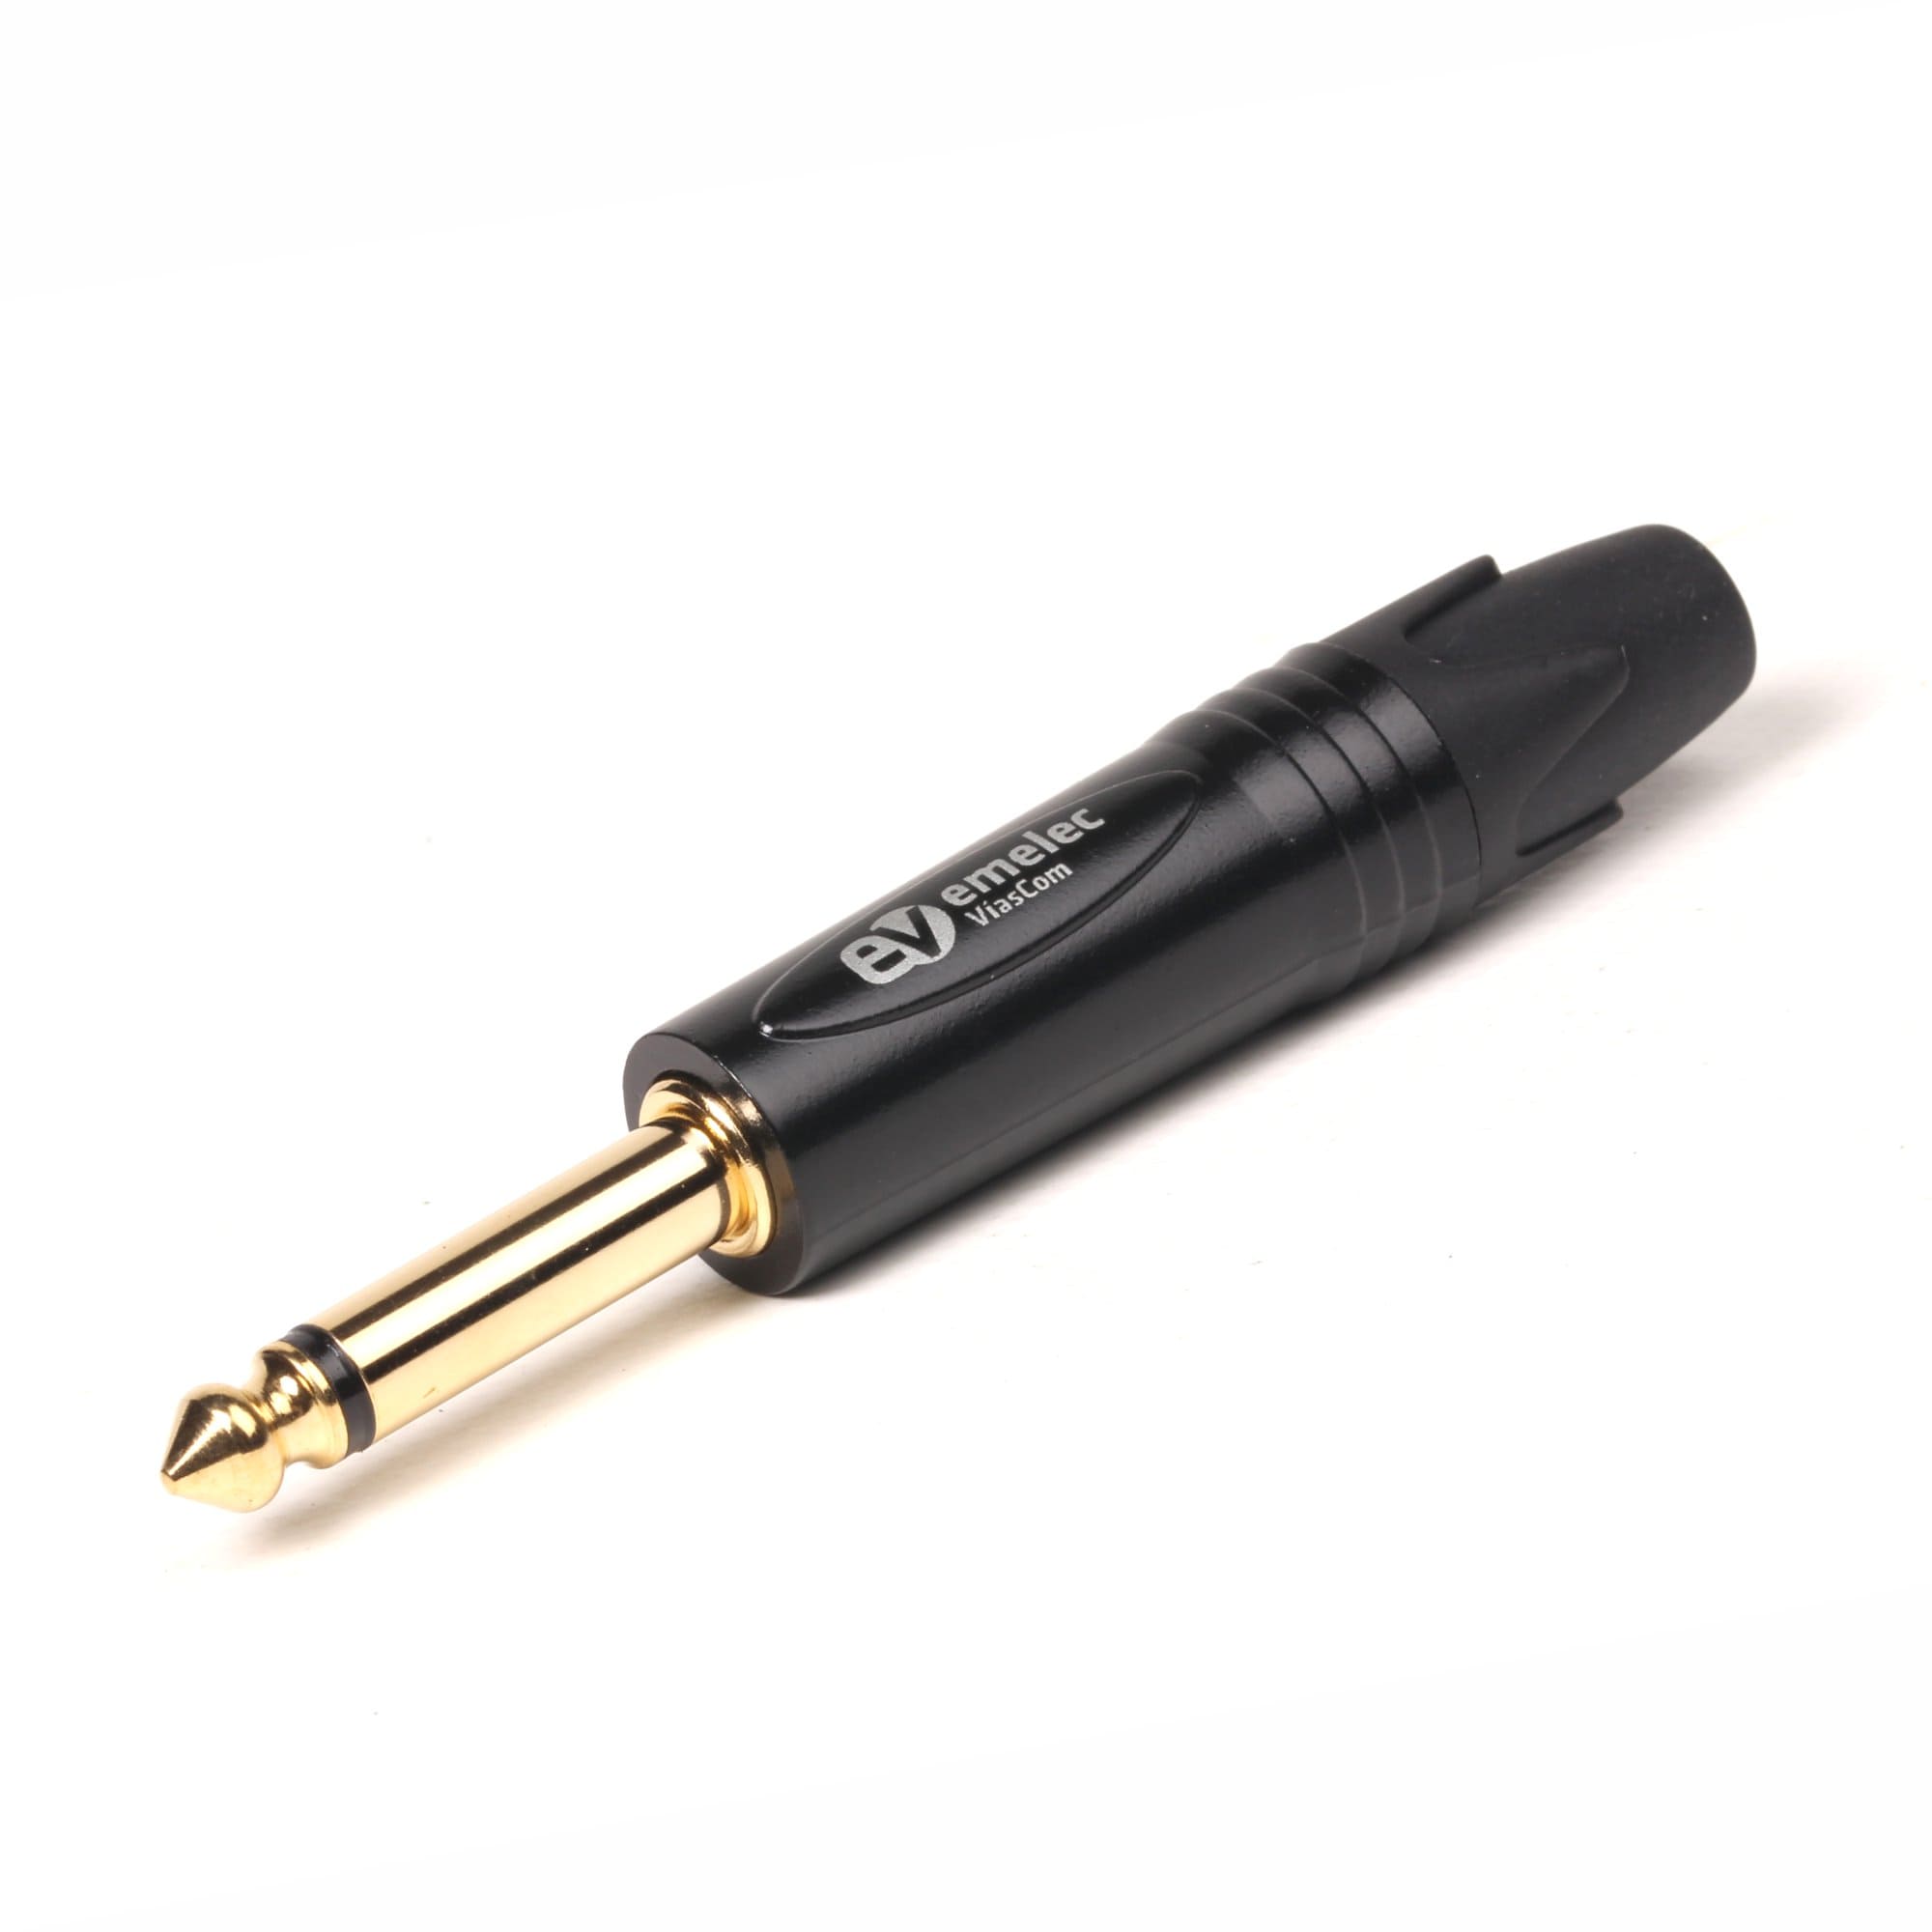 Jack 6.3 Male Mono Gold-plated Jack Connector